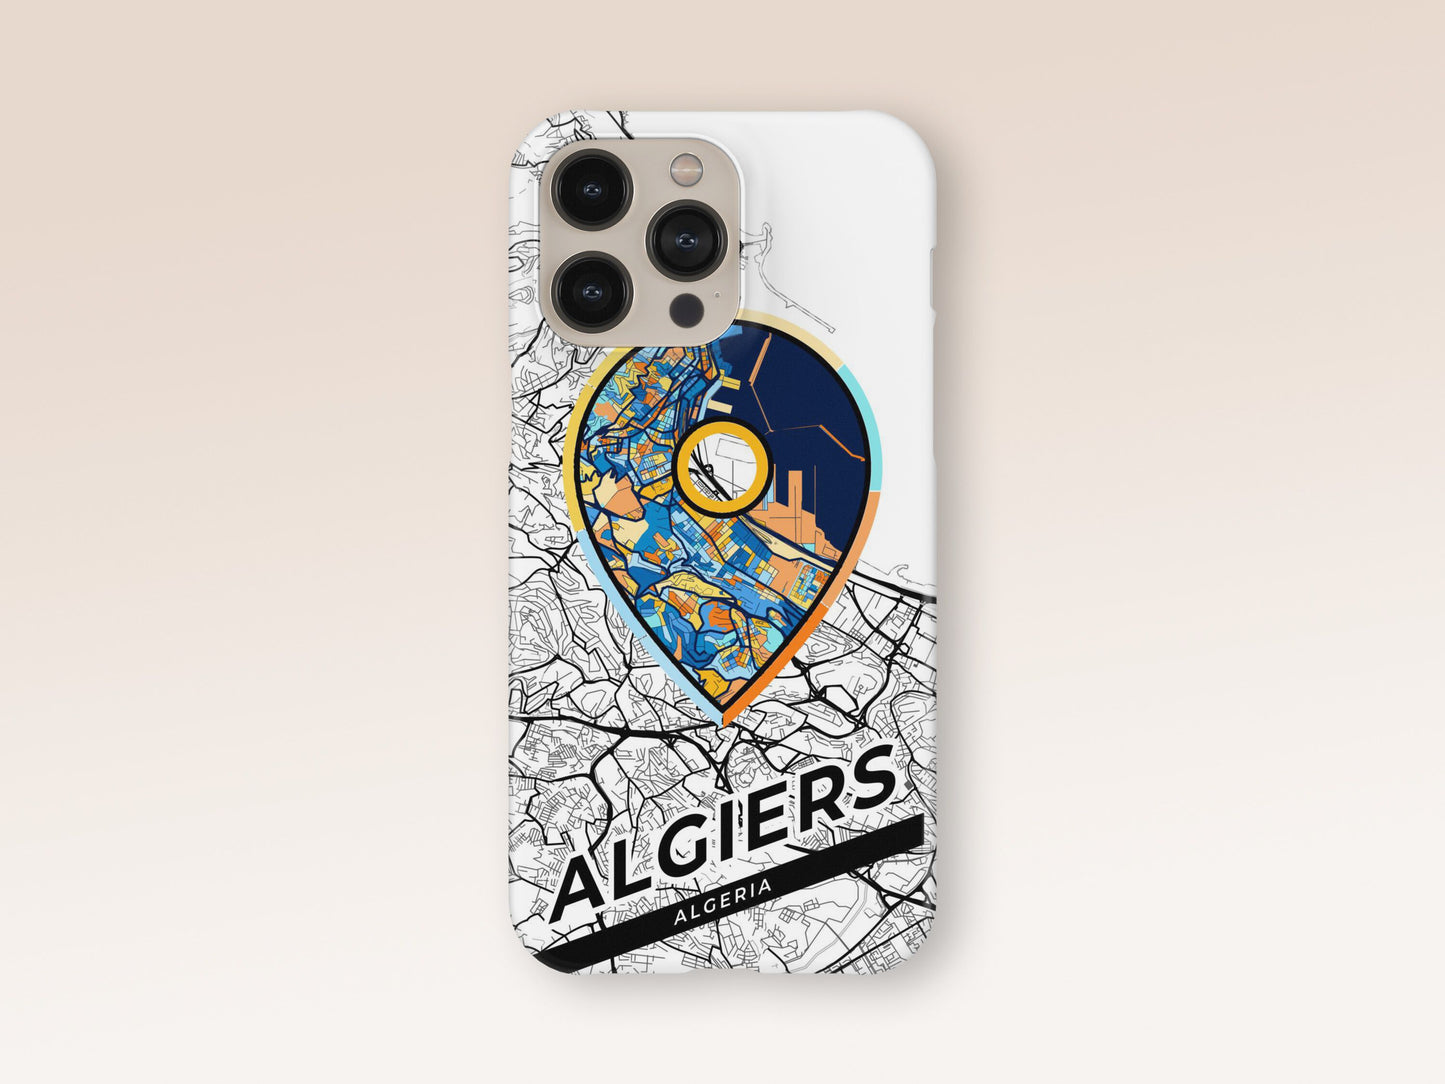 Algiers Algeria slim phone case with colorful icon. Birthday, wedding or housewarming gift. Couple match cases. 1